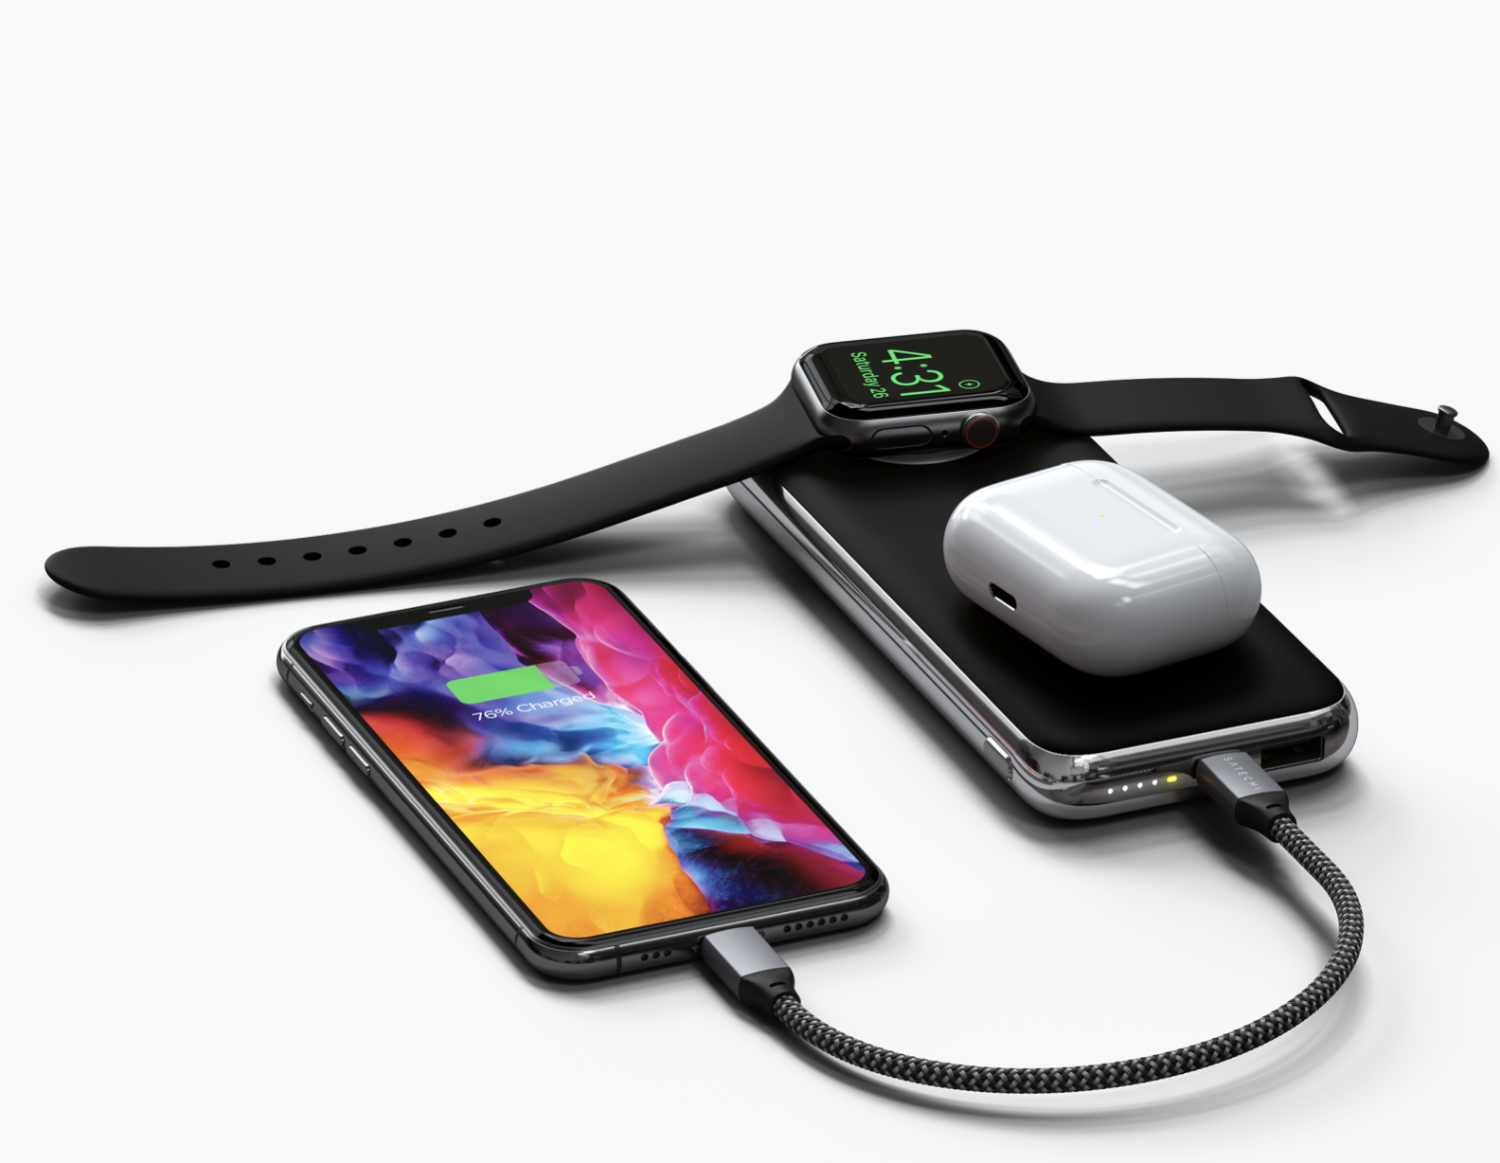 Satechi debuts Portable Power Bank with Apple Watch and wireless charging